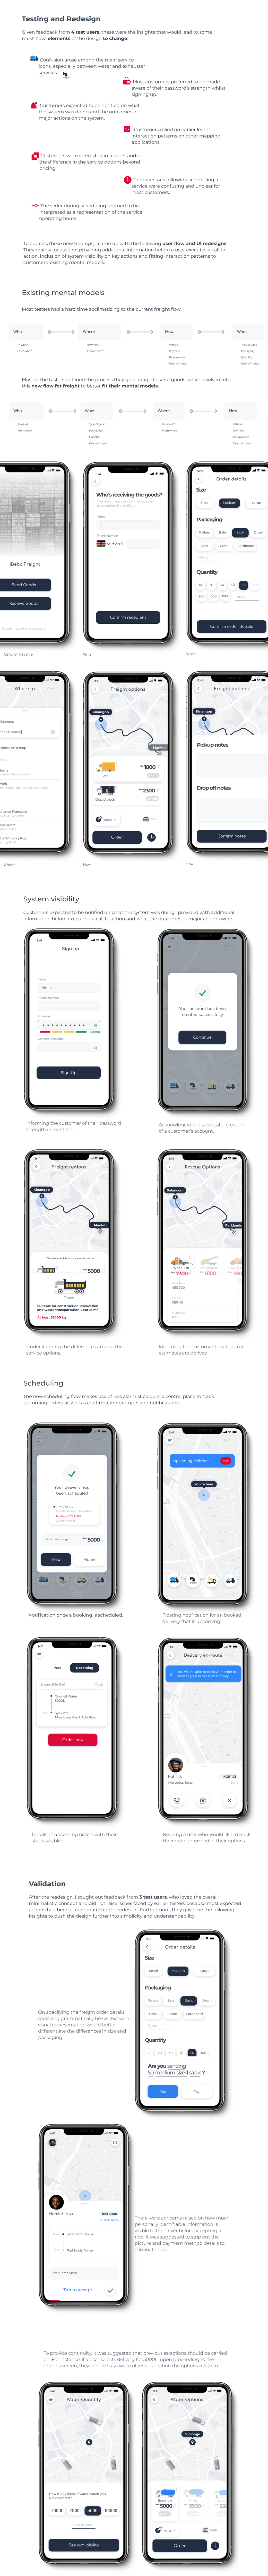 Freight Service Logistics Mobile UX Prototyping ride hailing ride hailing UI Service design utility UX Research UX testing